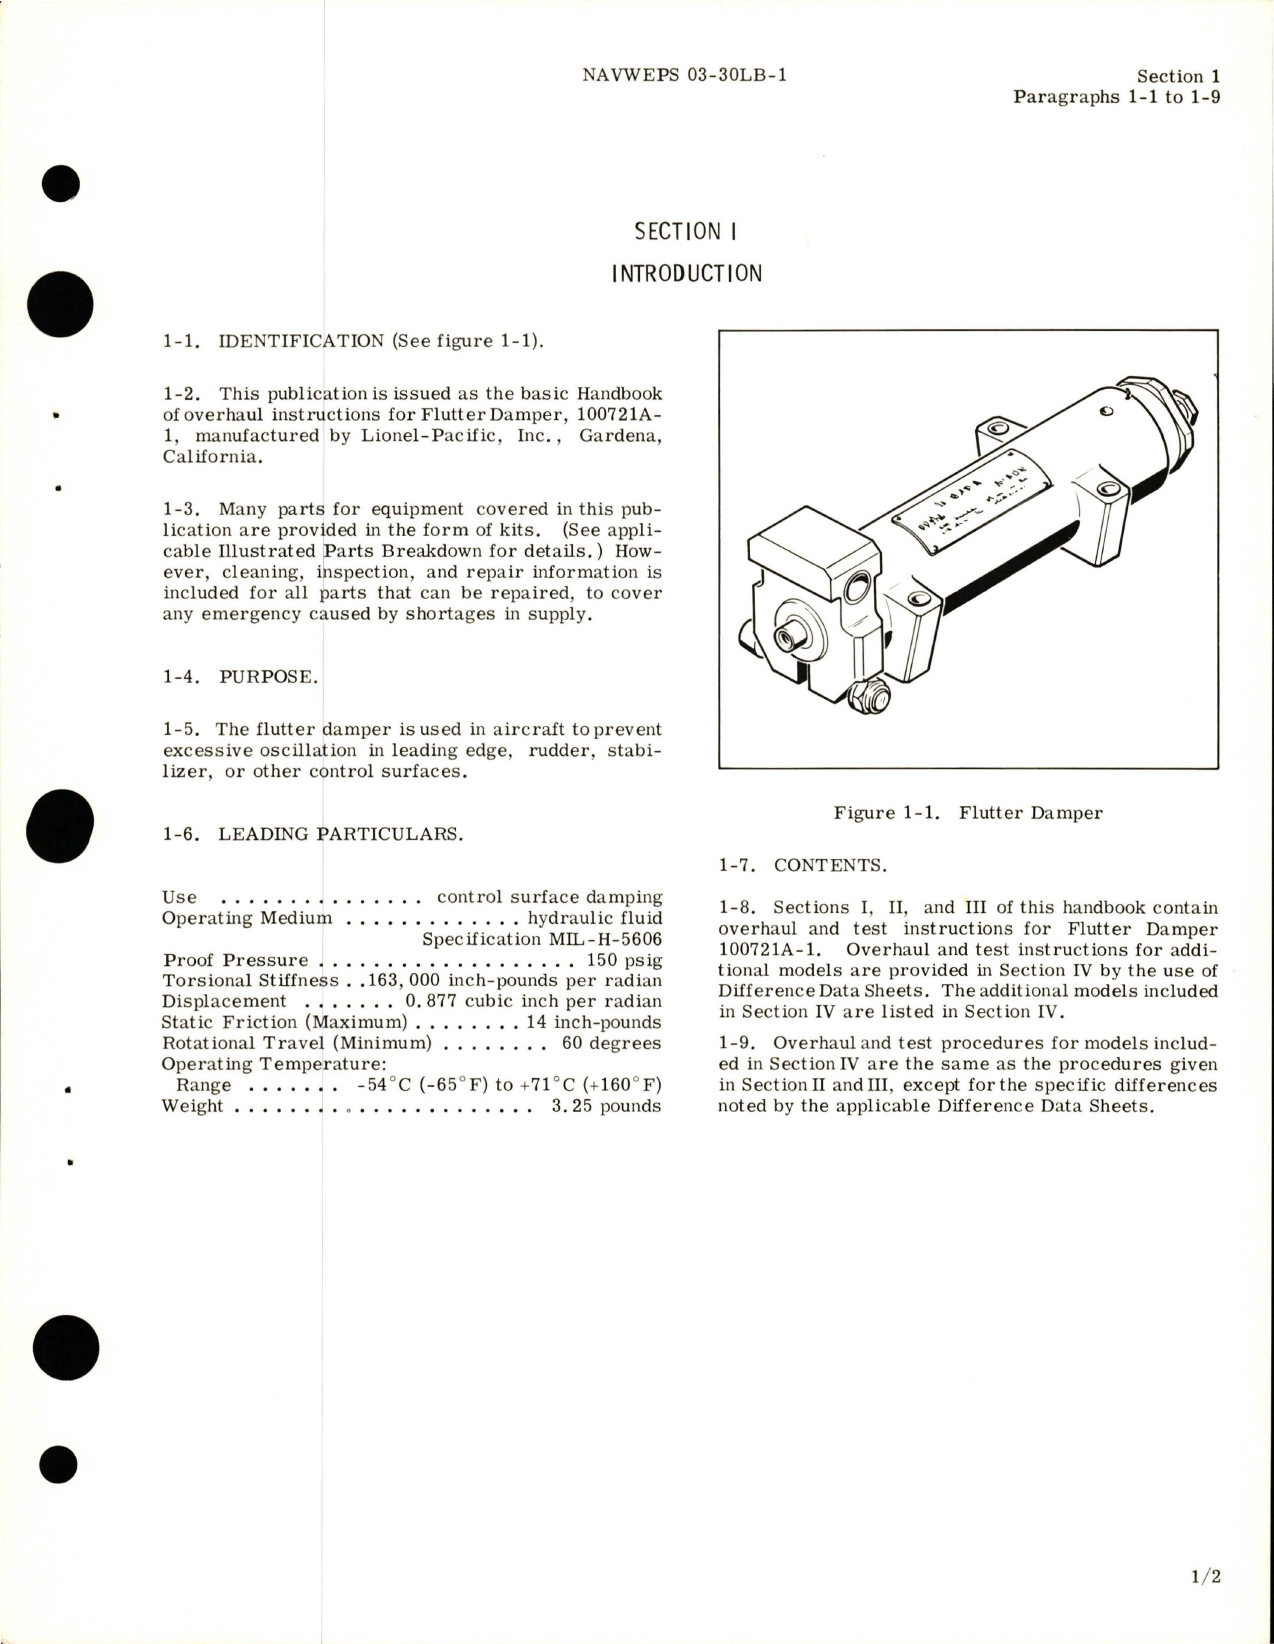 Sample page 5 from AirCorps Library document: Overhaul Instructions for Flutter Dampers - Parts 100721A, 100721A-1, 100721A-3, 100723A, and 100723A-1